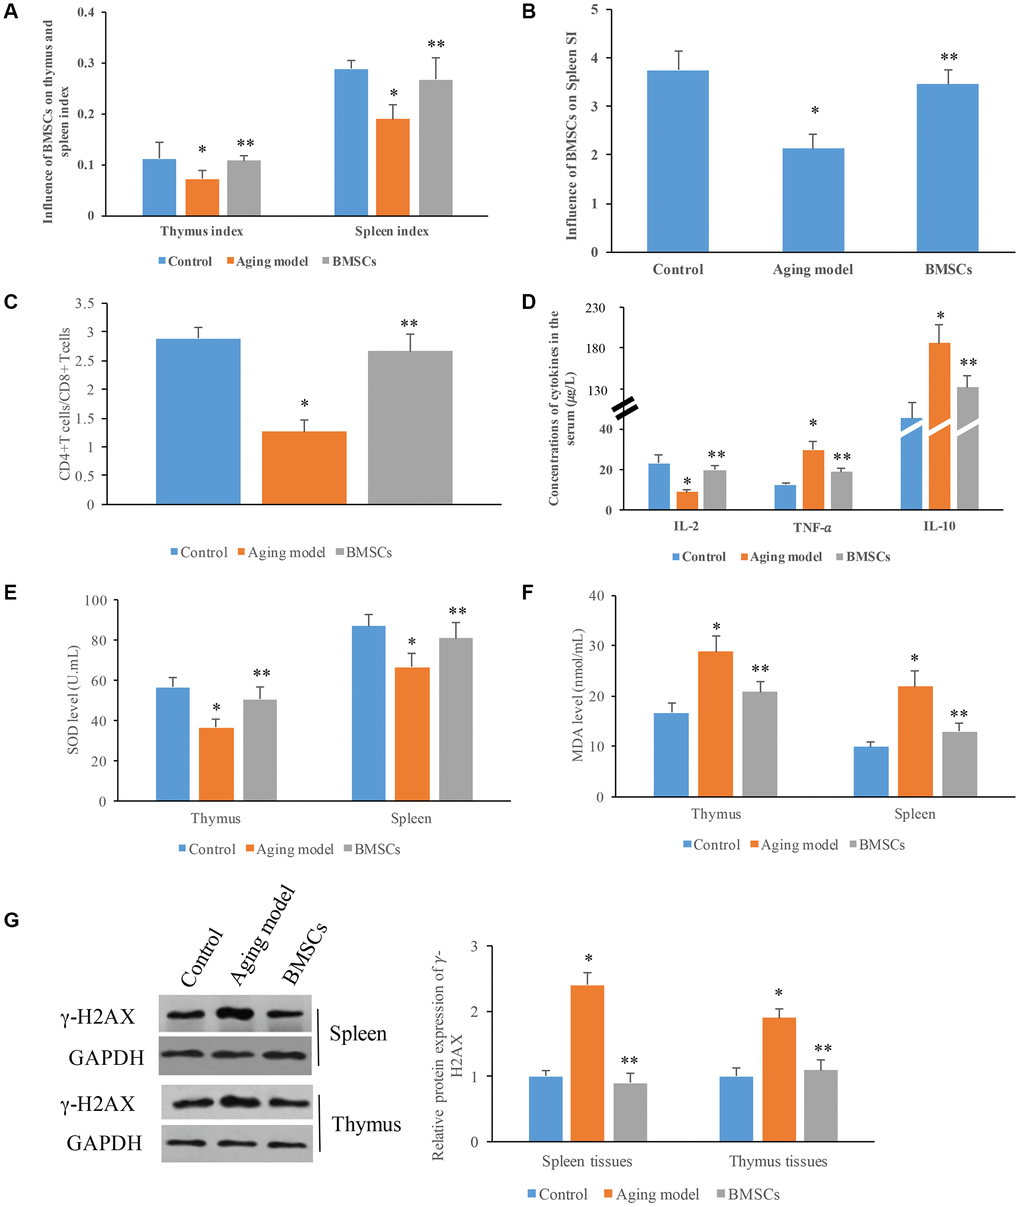 Influence of BMSCs on the transformation function of spleen lymphocytes and oxidative stress. (A) BMSCs significantly increased the thymus and spleen indexes; (B) BMSCs significantly increased the spleen SI; (C) Remarkable higher ration between CD4+ T cells and lower CD8+ T cells was achieved by BMSCs; (D) Influence of BMSCs on cytokines in the serum; (E) Influence of BMSCs on SOD levels in the tissues; (F) Influence of BMSCs on MDA levels in the tissues; (G) Influence of BMSCs on protein expression of γ-H2AX in the tissues. * P